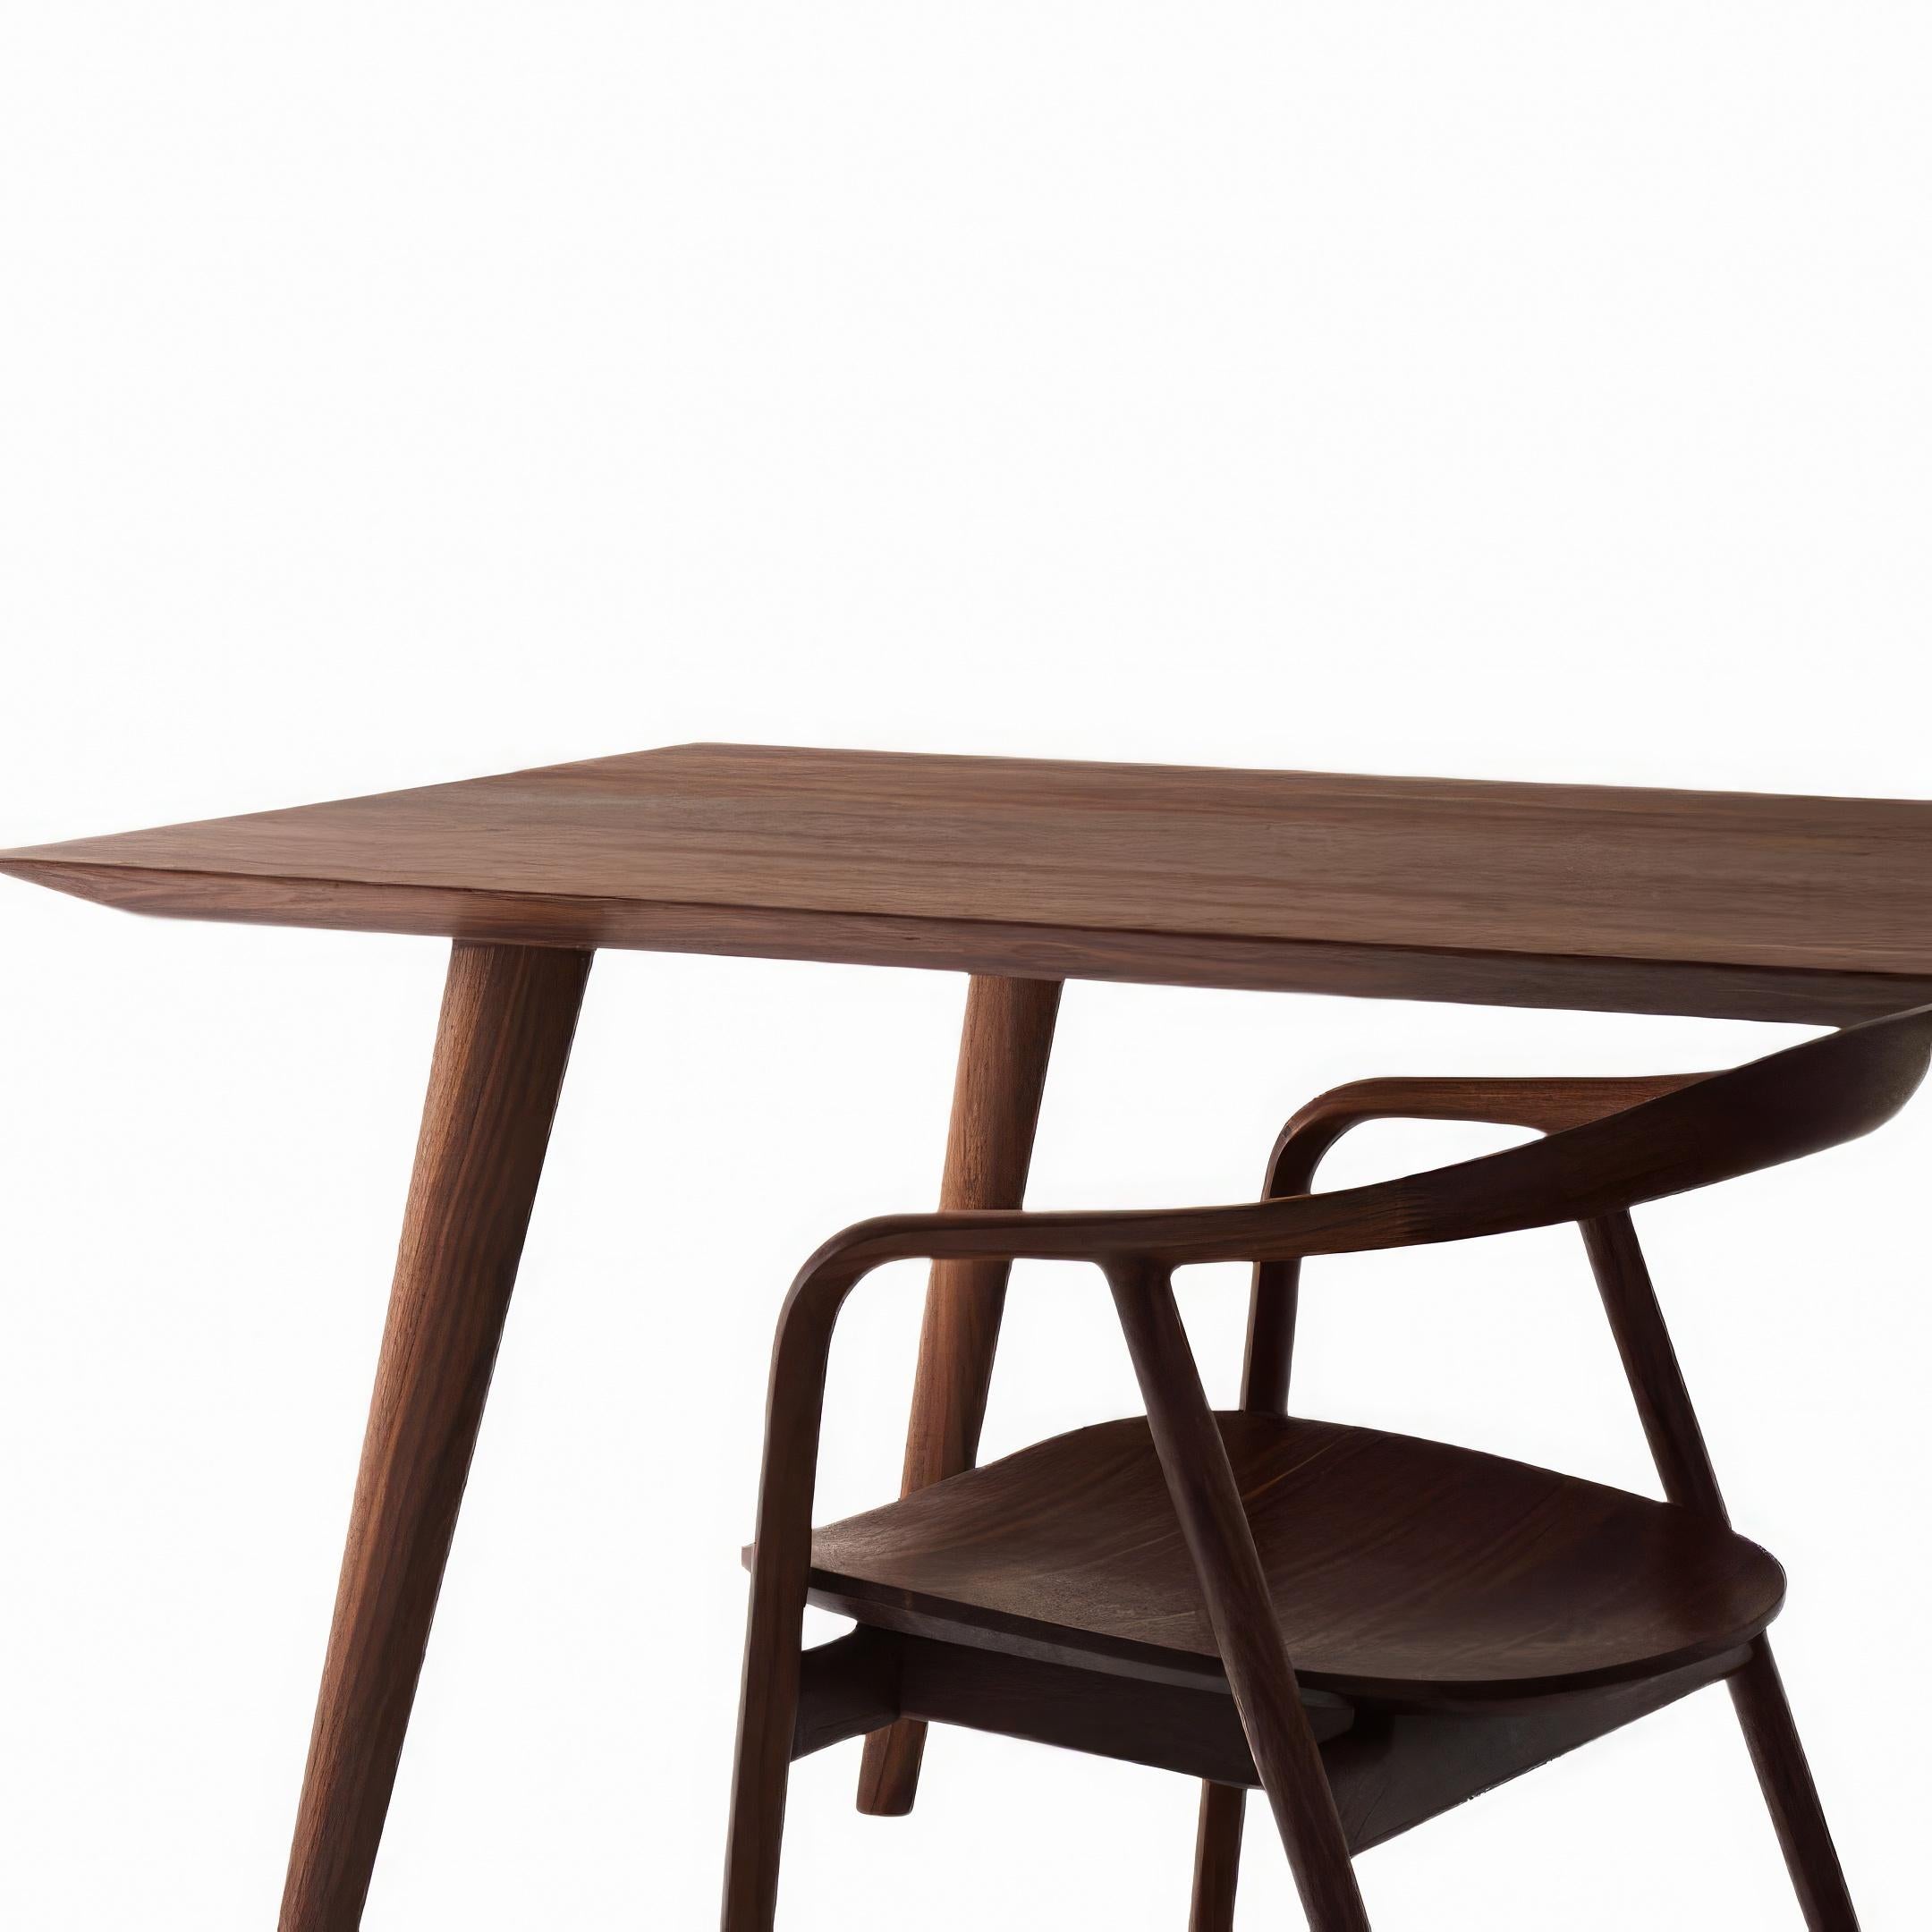 Kengo Kuma 'Kumahida' Wood Dining Table in Walnut for Hida

For centuries, famed Hida artisans in Gifu prefecture have played a role in Japan's woodworking culture, crafting iconic bentwood furniture from sustainable local forests. Established in